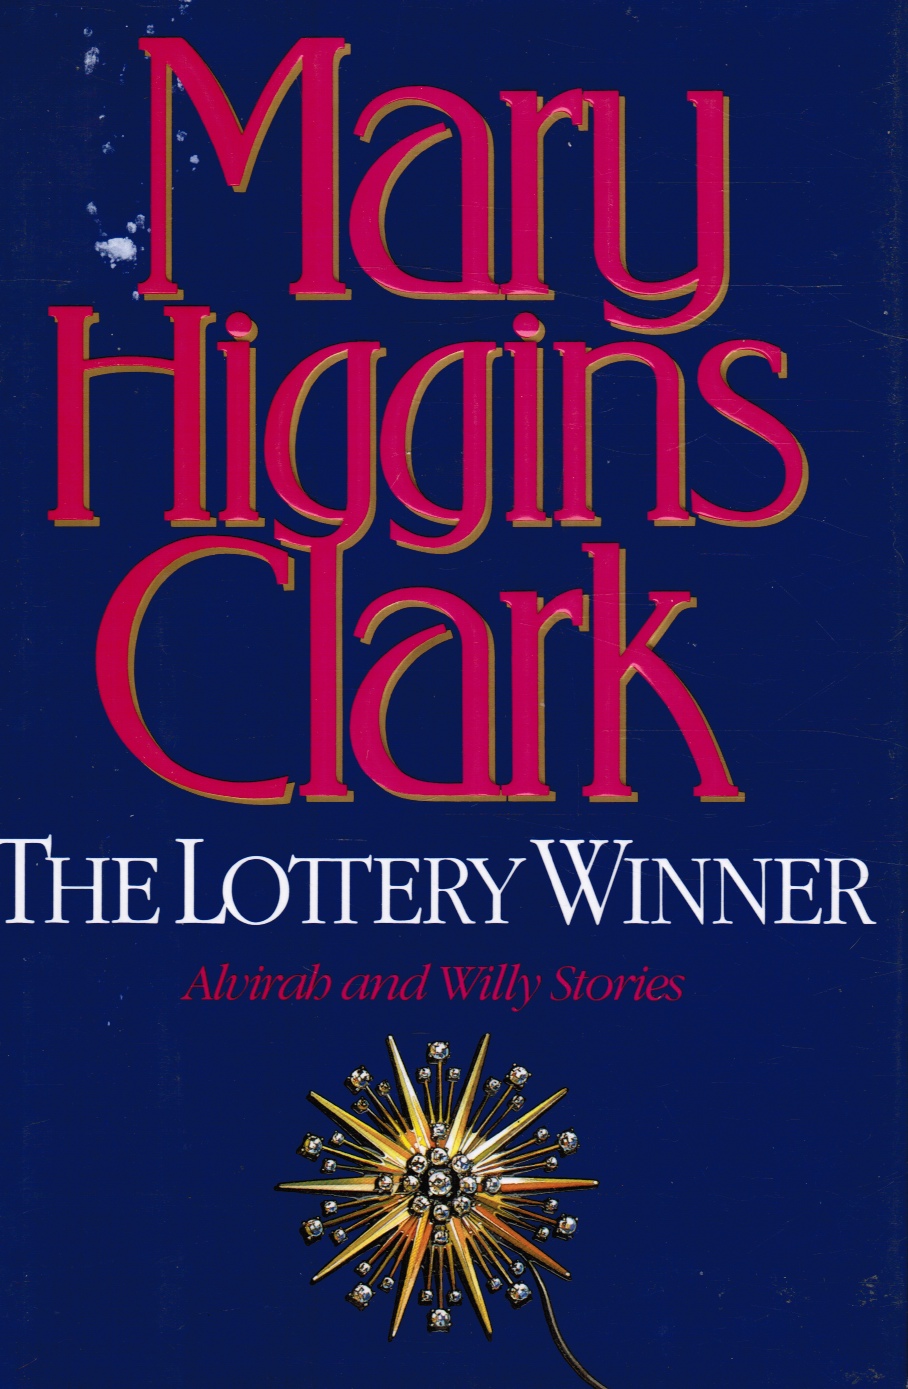 CLARK, MARY HIGGINS - The Lottery Winner: Alvirah and Willy Stories